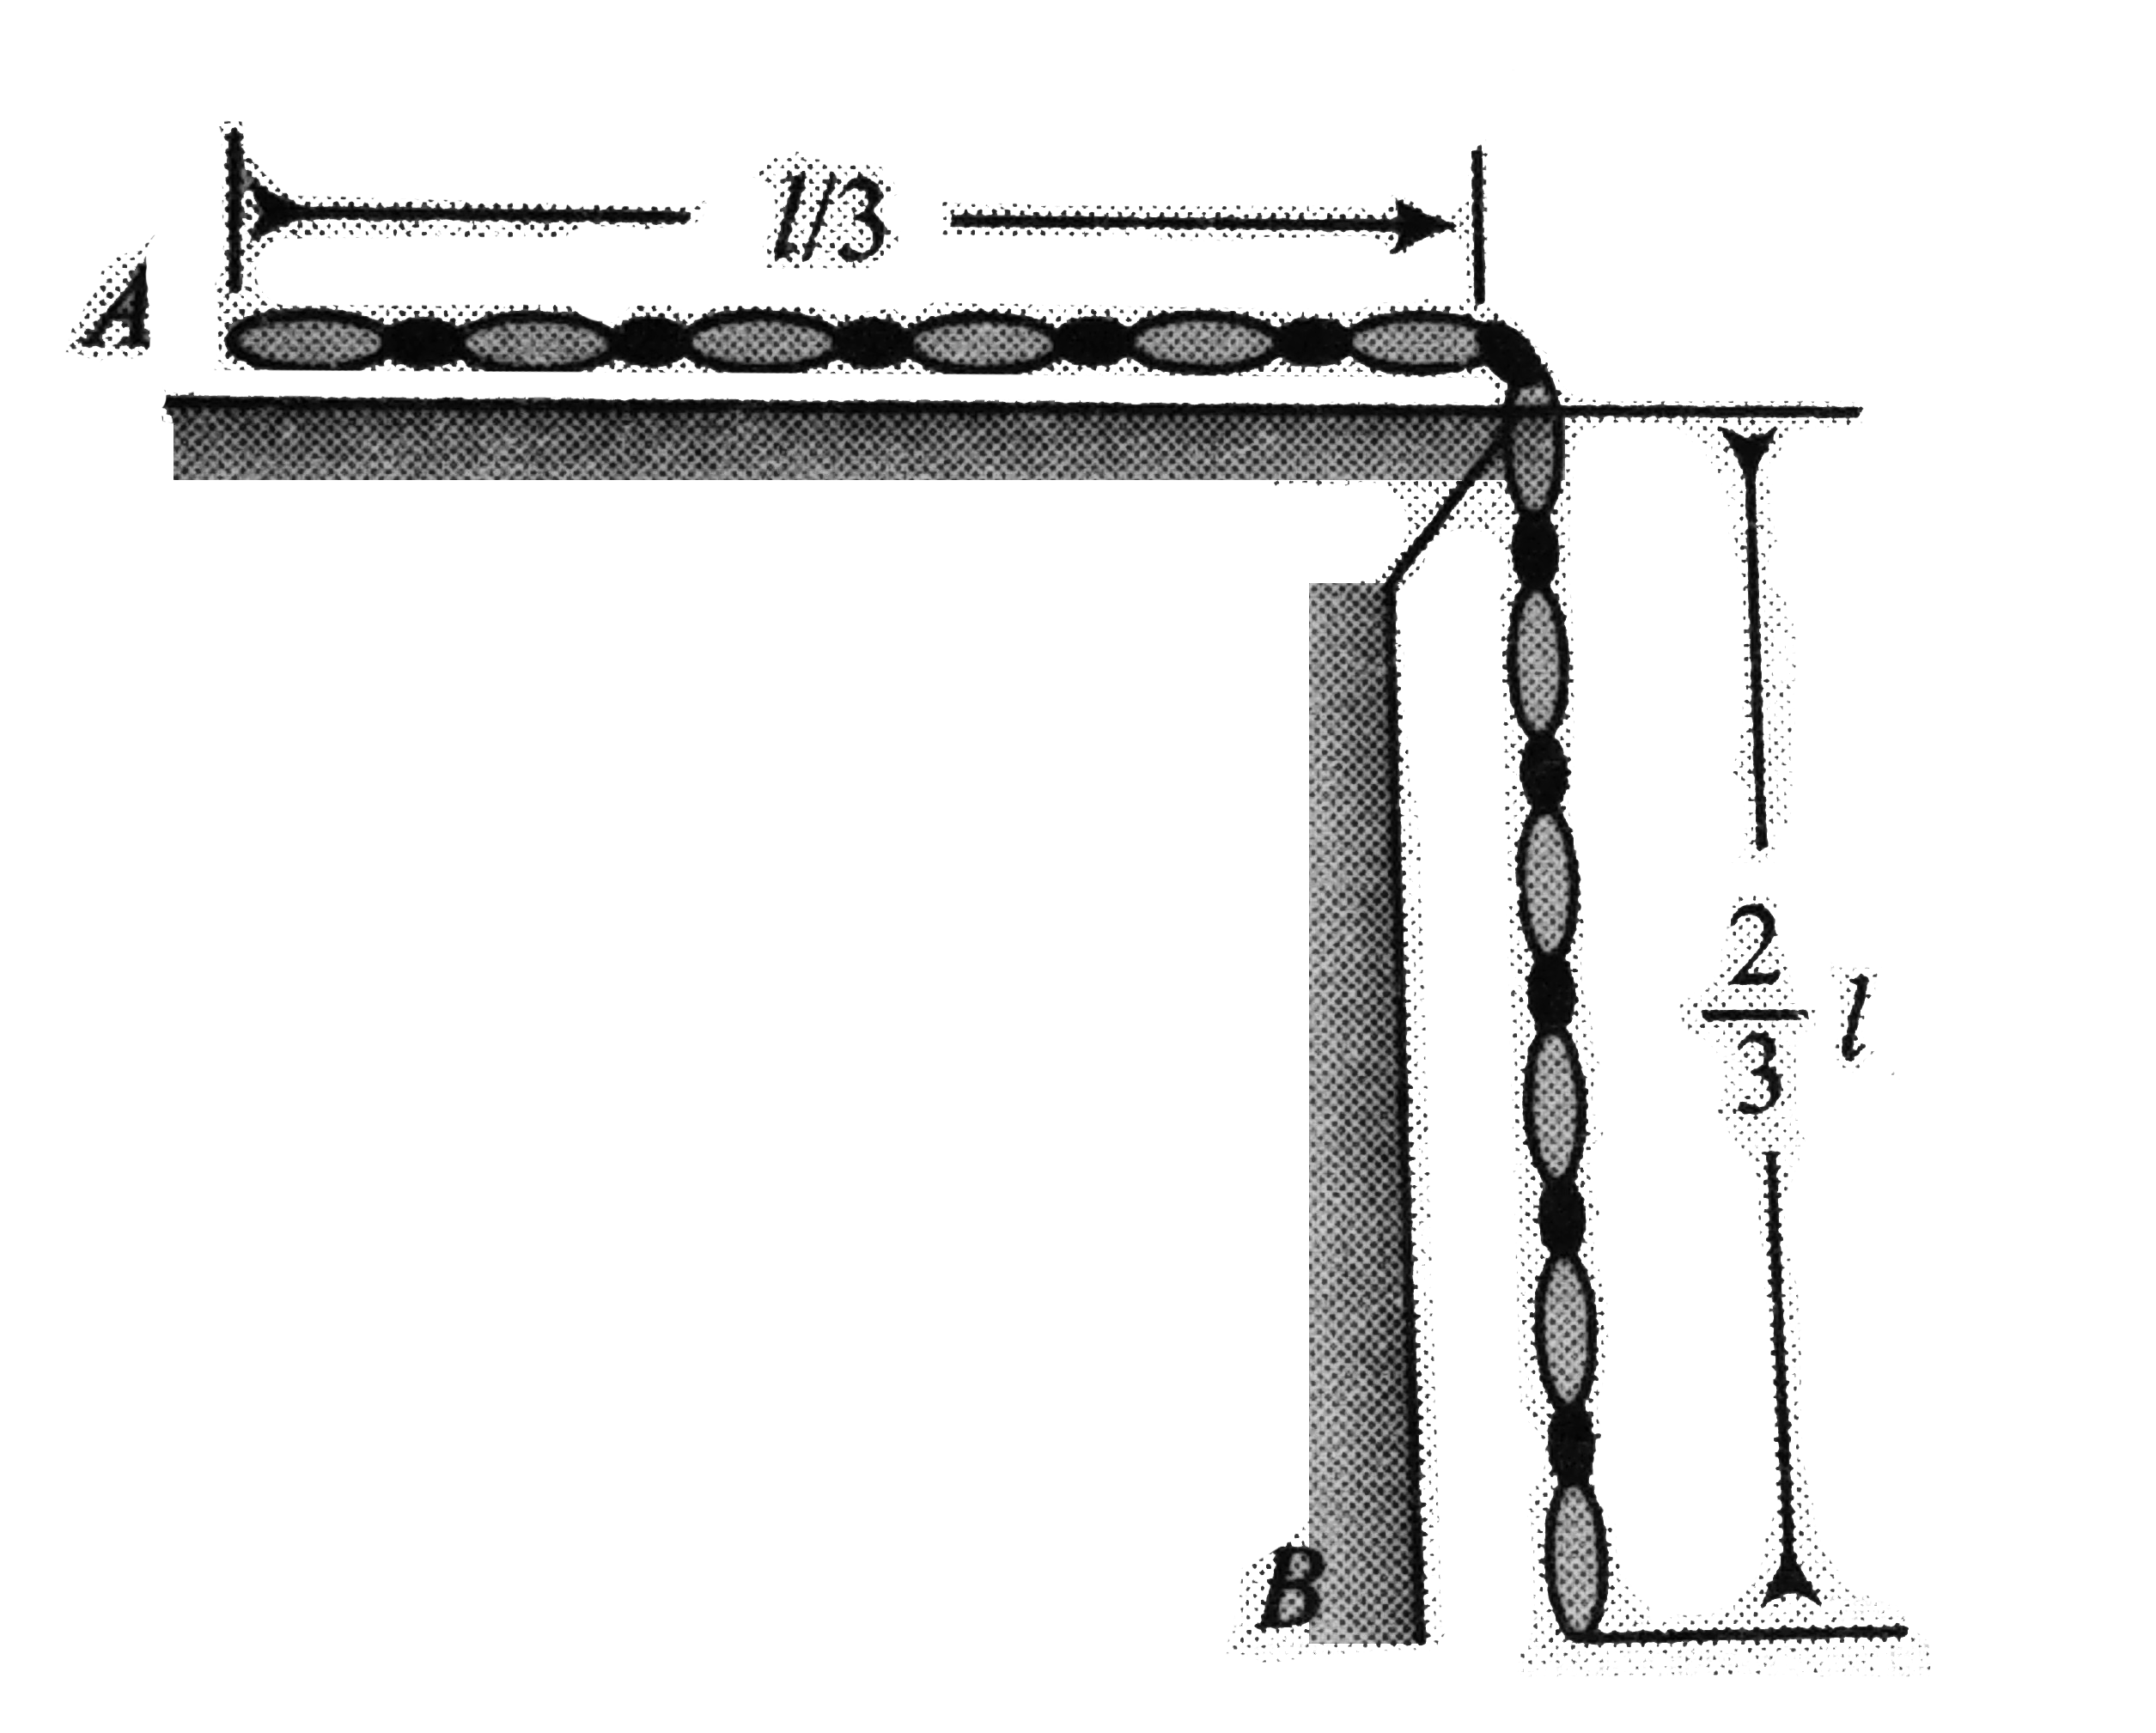 A uniform chain of mass m and length l is at the verge of sliding under the effect of gravity of the hanging part. Find the      a. coefficient of friction, between chain and table.   b. work done by friction and gravity till the chain leaves the table if the hanging part is pulled gently and released.   c. speed of the chain at the time of leaving the table in part (b) .   d. work done by the external force acting at the end A of the chain in slowly pulling the chain completely onto the table.